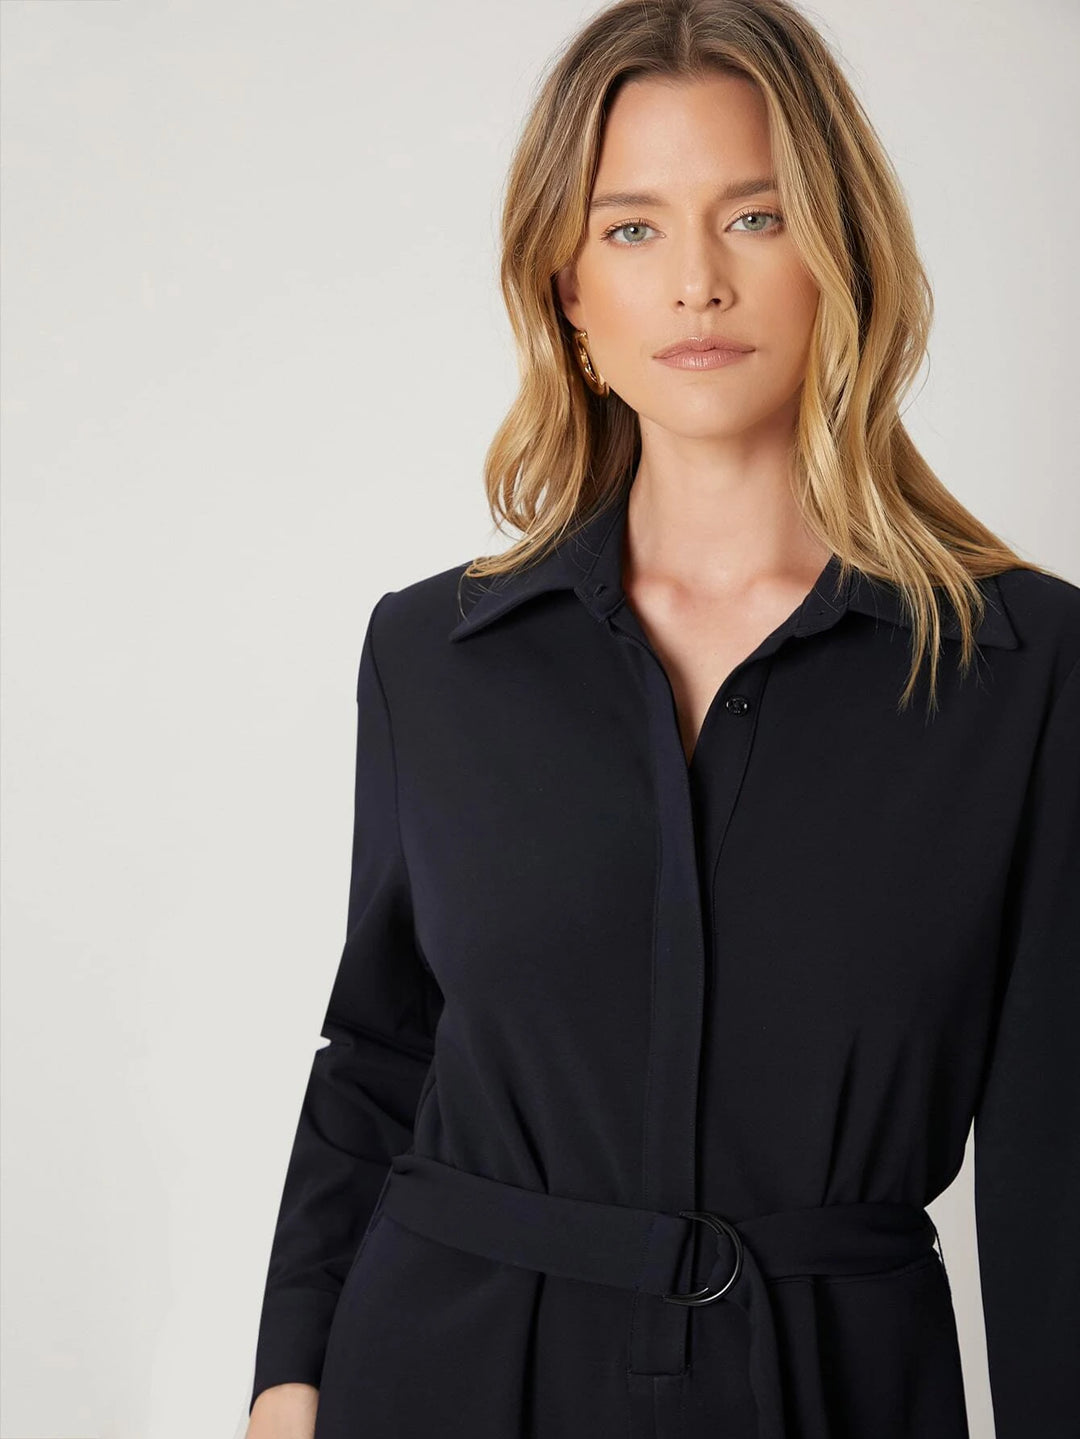 Long Sleeve Belted Shirt Jumpsuit